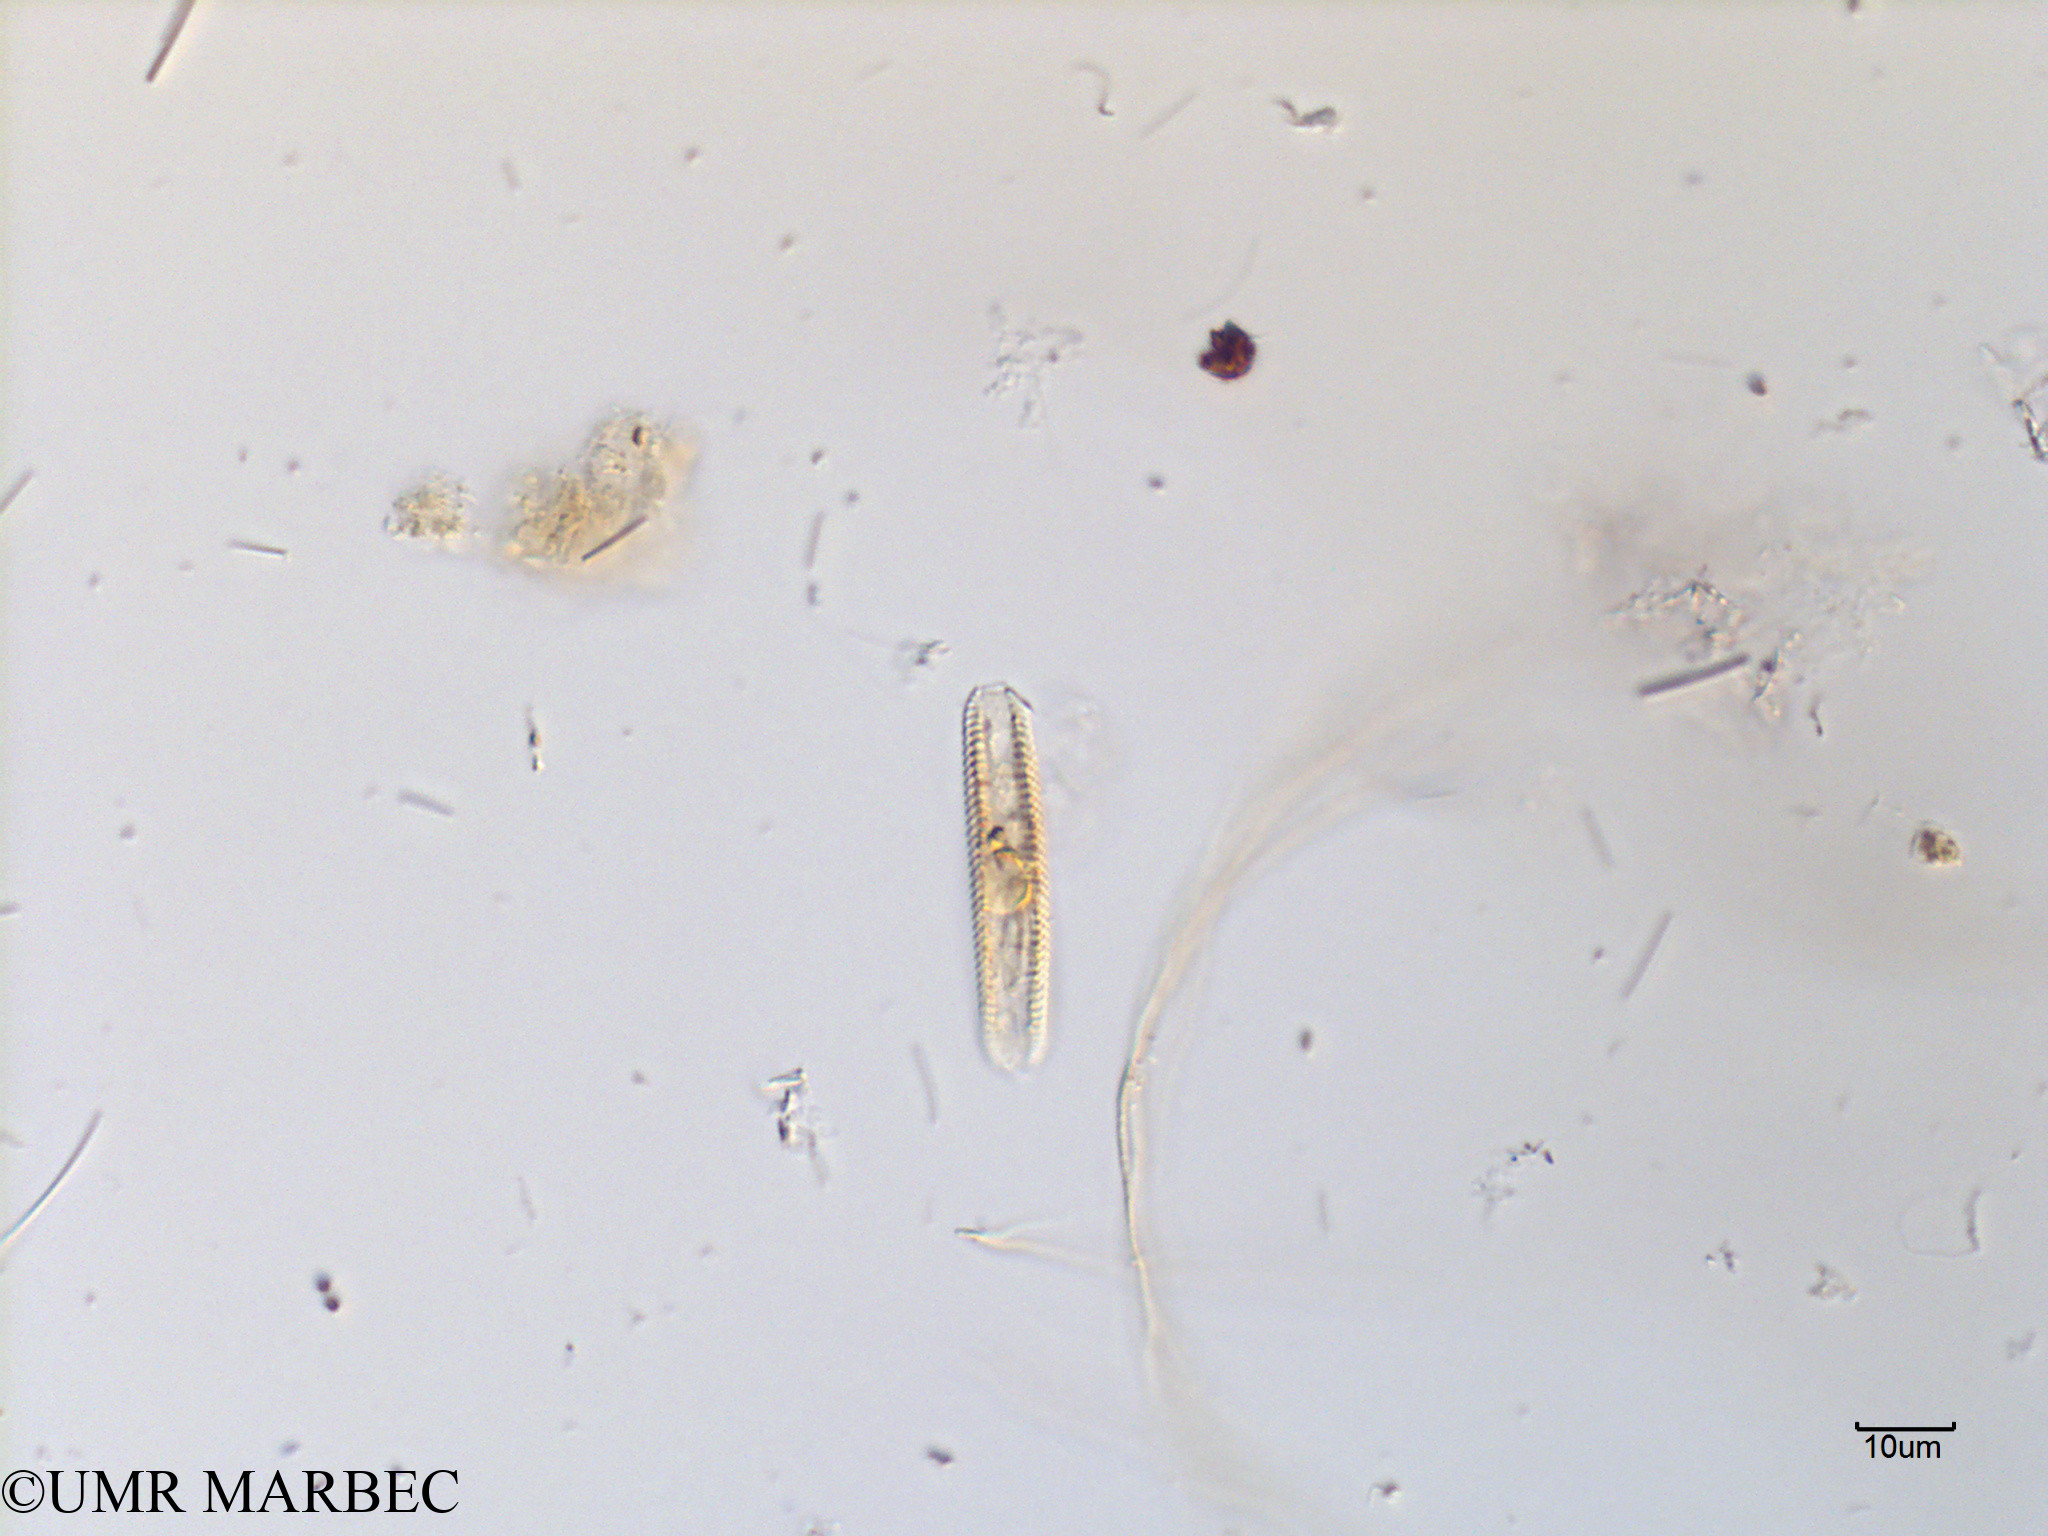 phyto/Scattered_Islands/mayotte_lagoon/SIREME May 2016/Pennée spp 5-10x50-100µm (MAY10_pennee laquelle).tif(copy).jpg